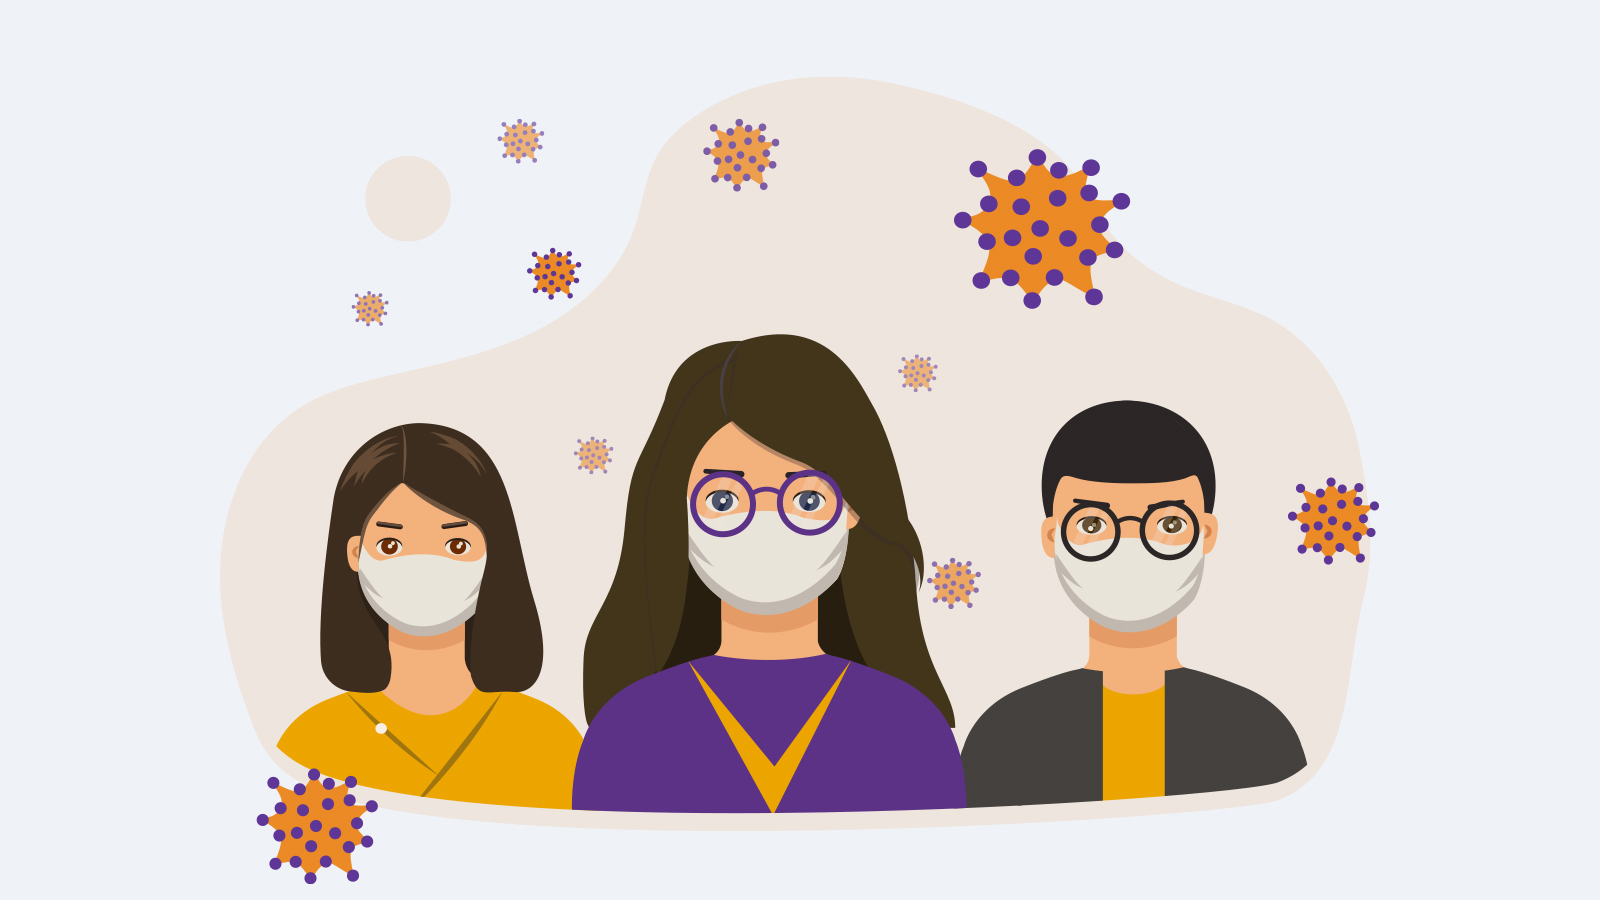 How to use disinfectant to clean eyeglasses in the pandemic of Coronavirus?